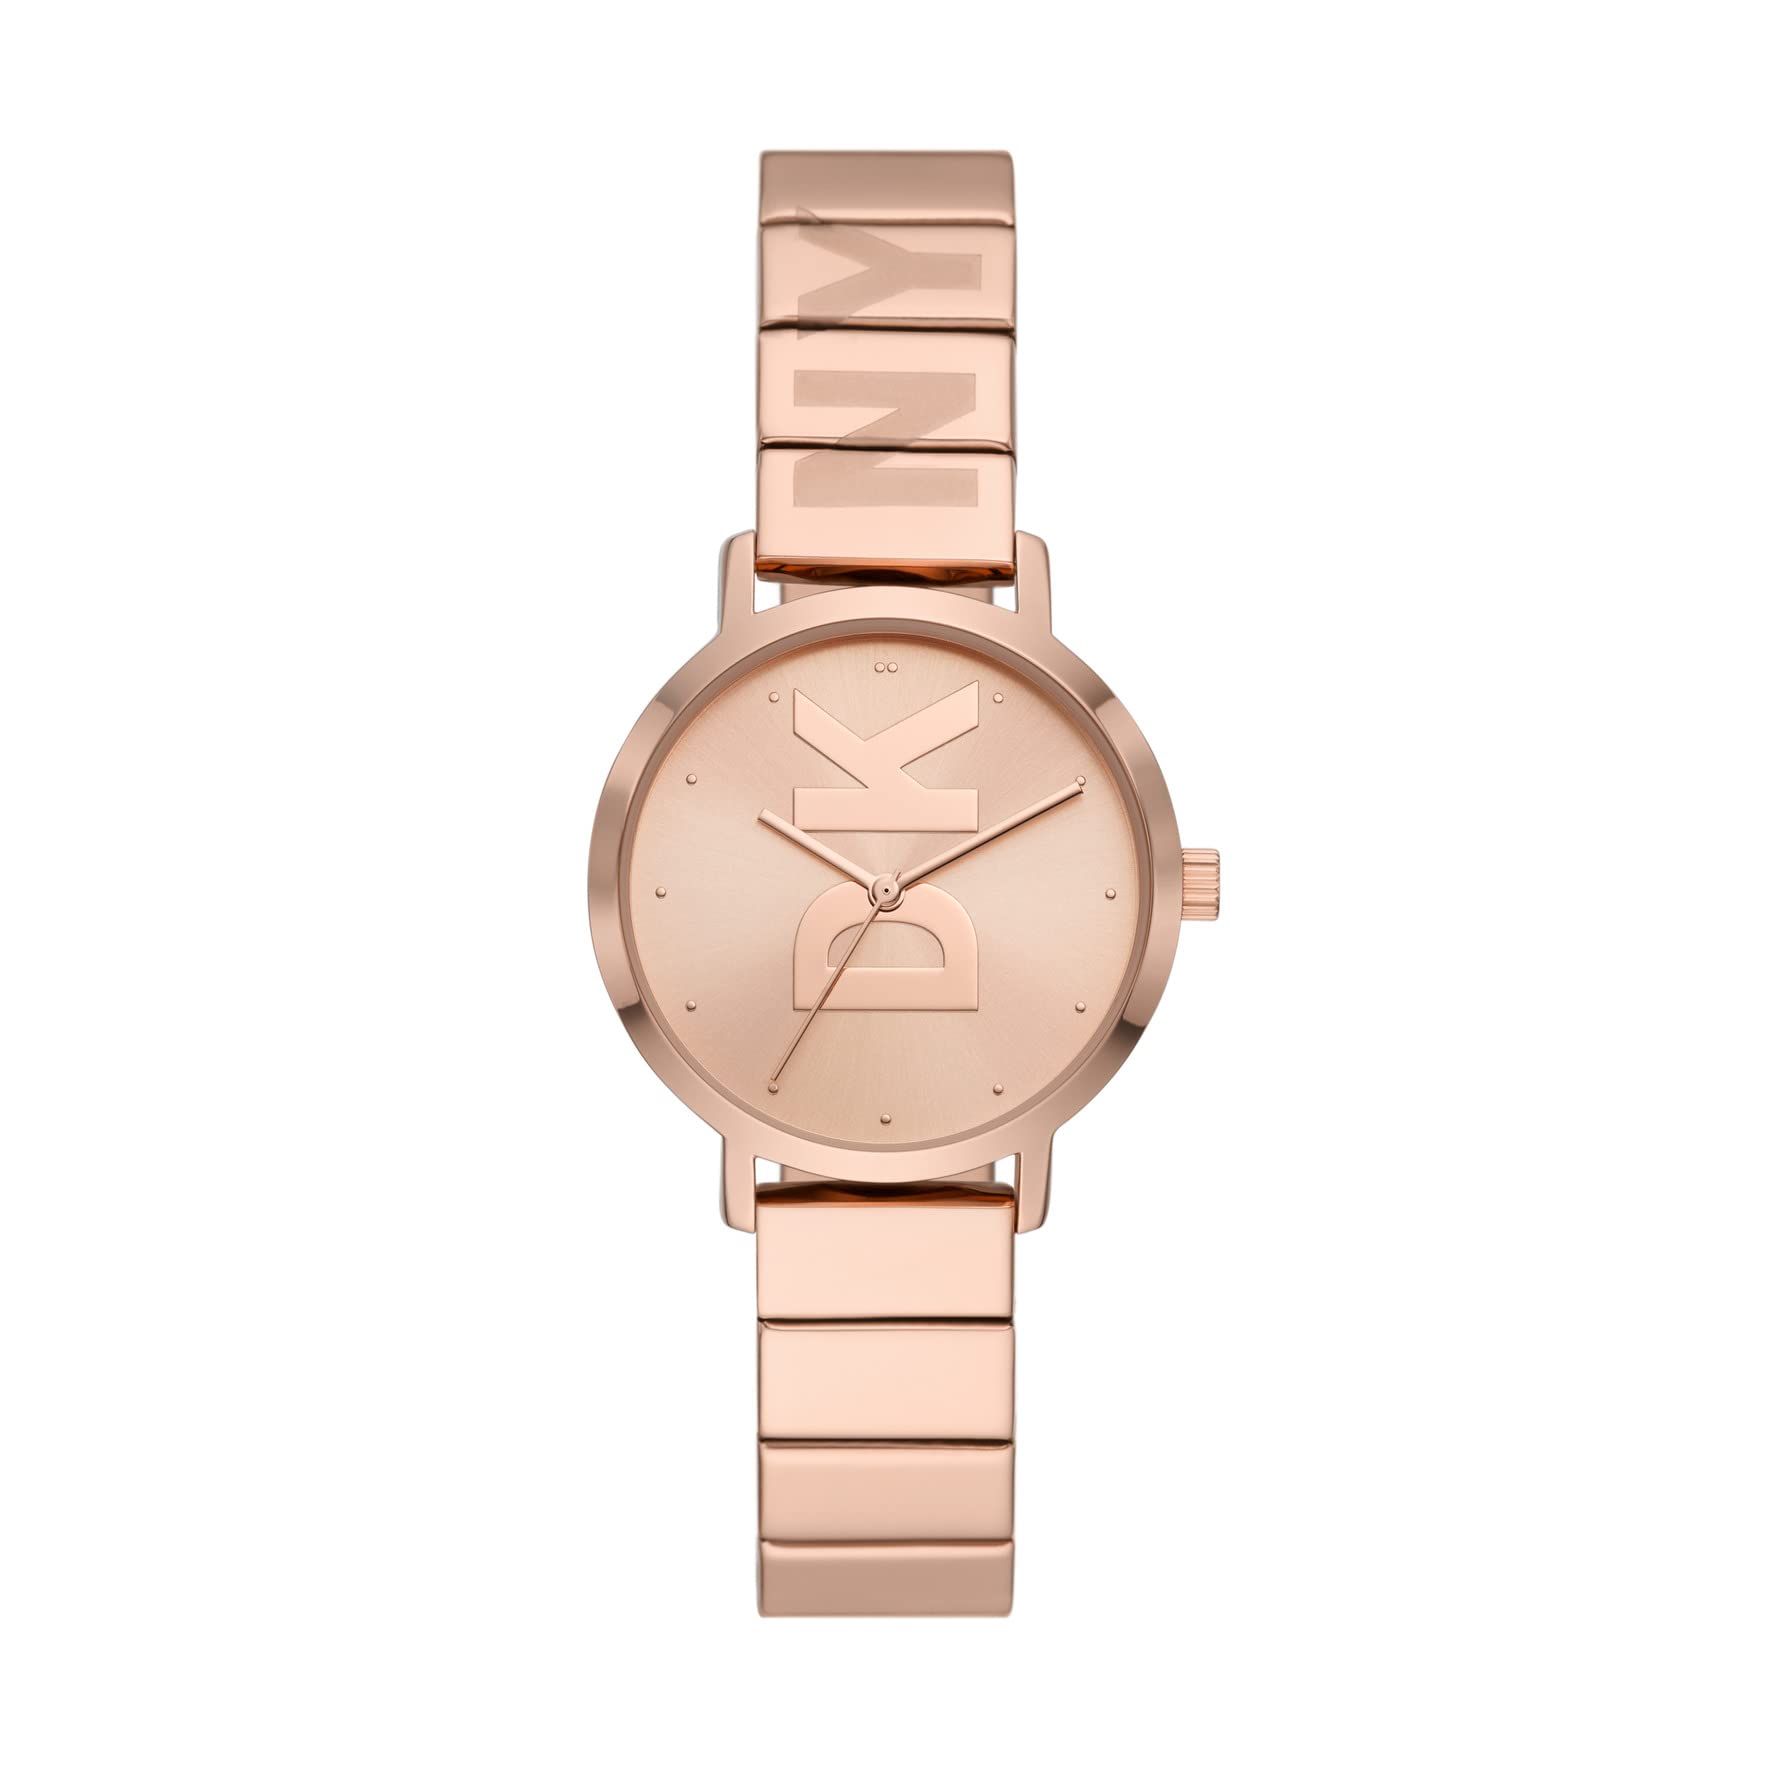 DKNY Womens The Modernist Quartz Stainless Steel Three-Hand Dress Watch Color Rose Gold Model NY2998